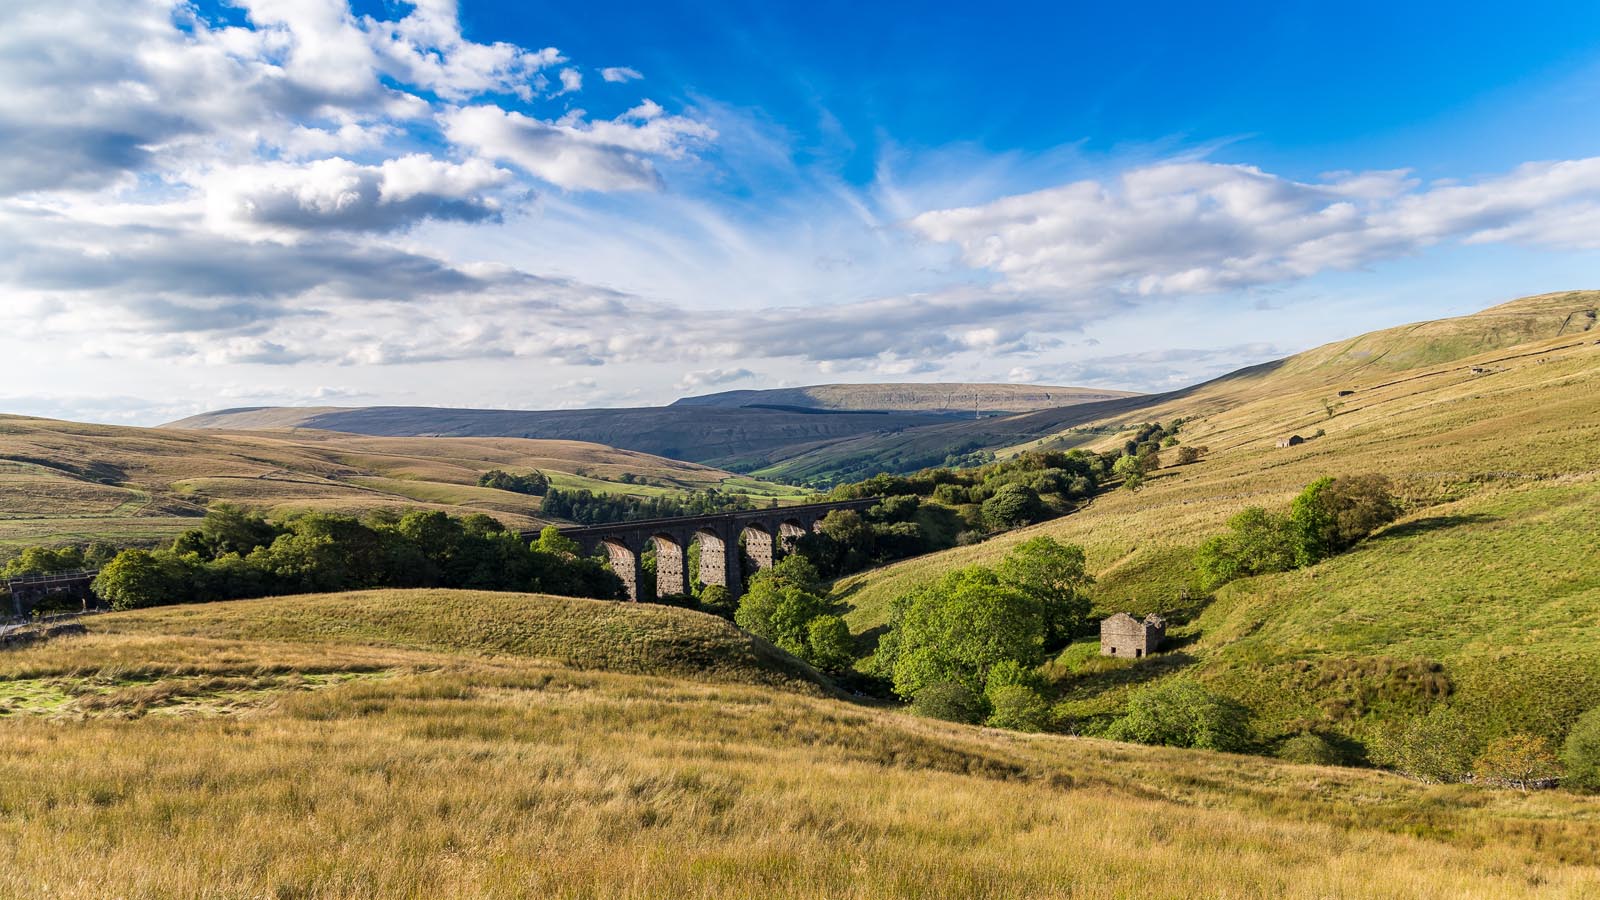 Sunny picture of the Yorkshire Dales.